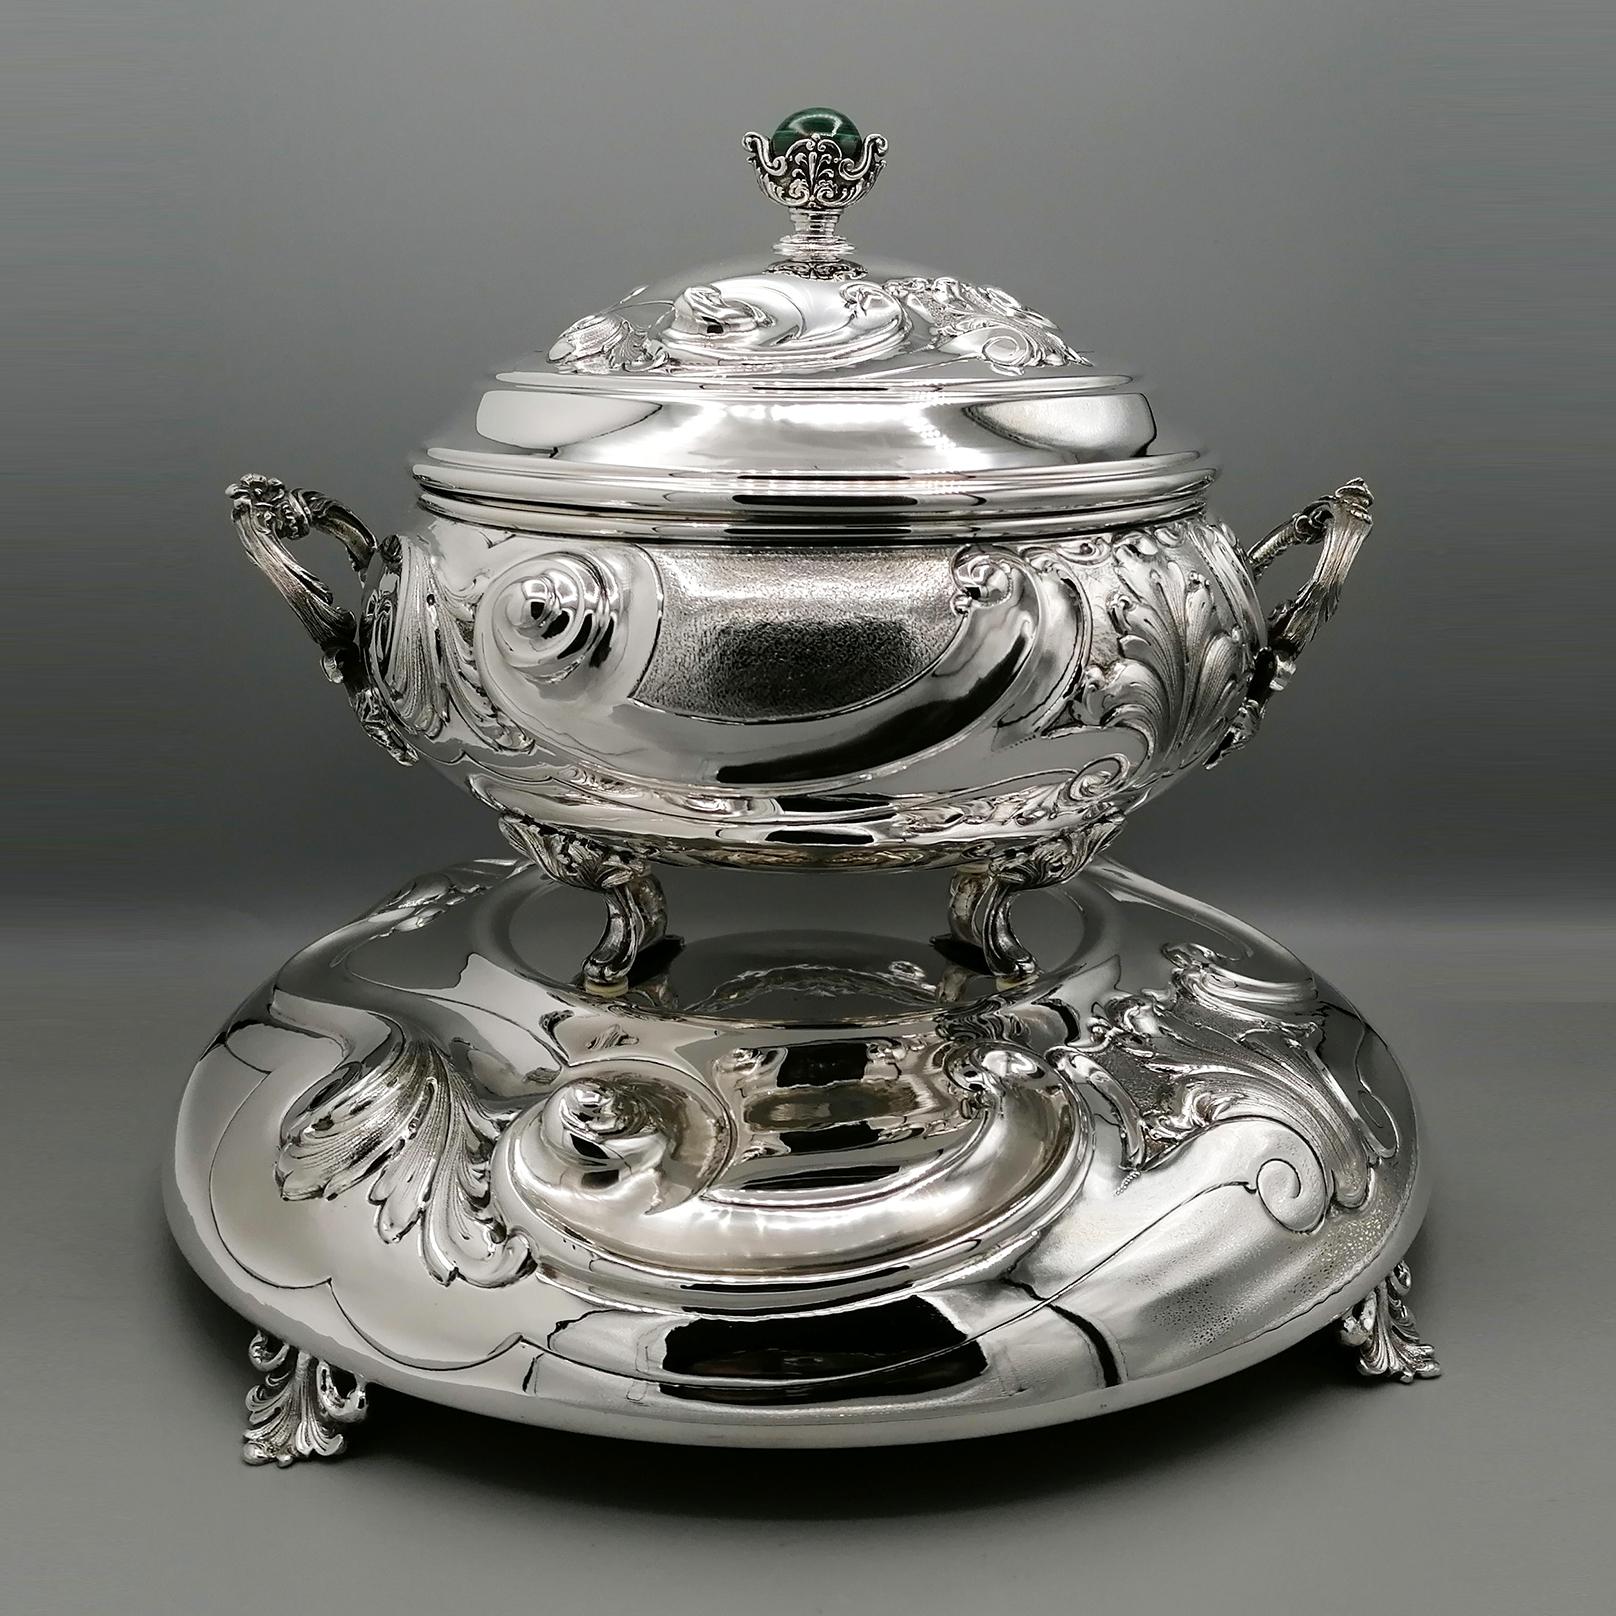 Baroque style solid silver tureen.
The body of the tureen is round where embossments have been made with volute designs and acanthus leaves.
Hand knurling was carried out between the embossed work and the polished parts.
Some parts of the scrolls